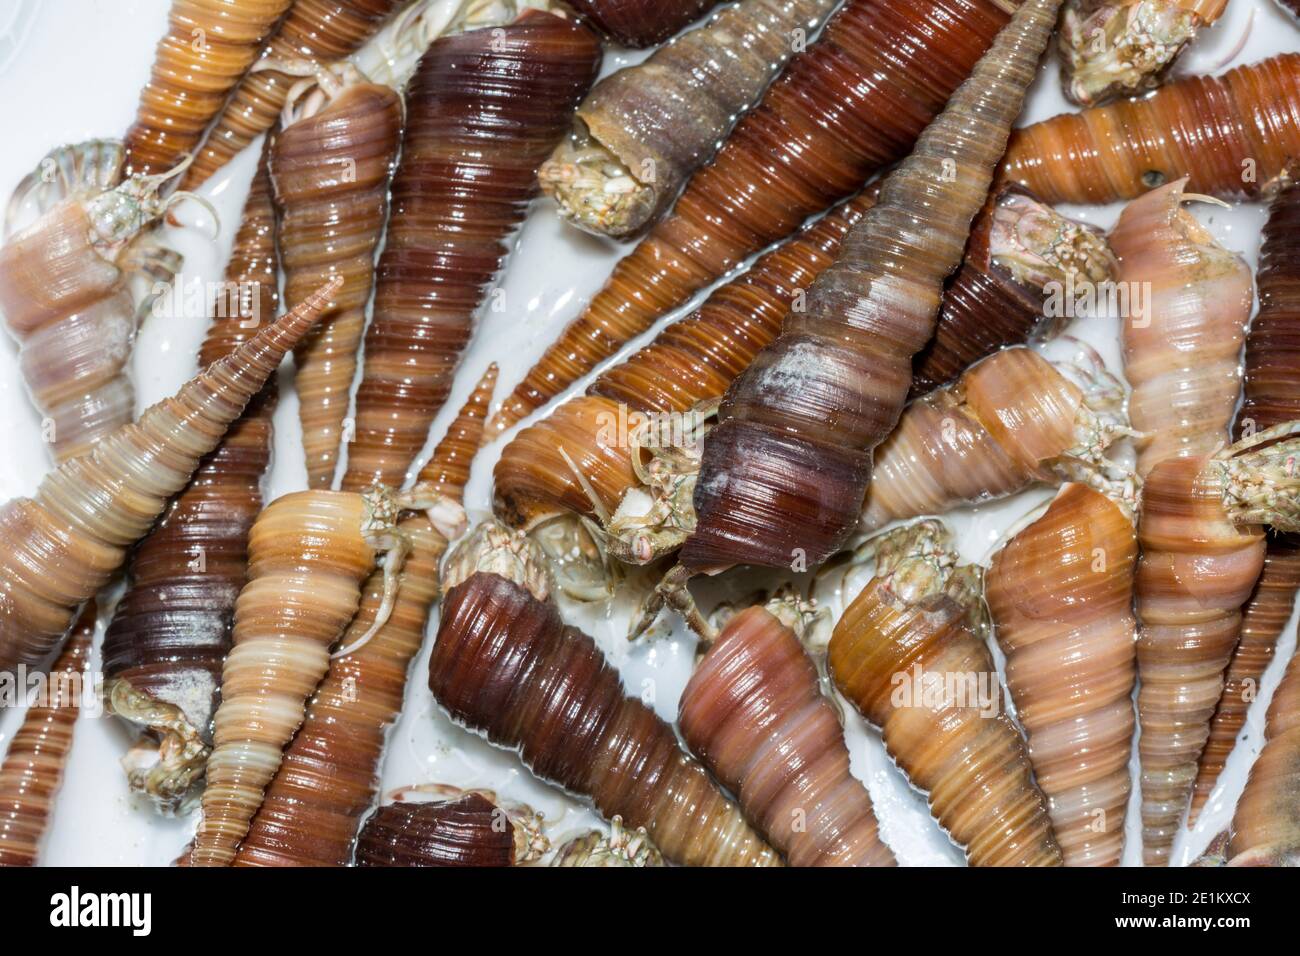 Hermit crabs with spiral shells ready to be cooked in the restaurant Stock Photo